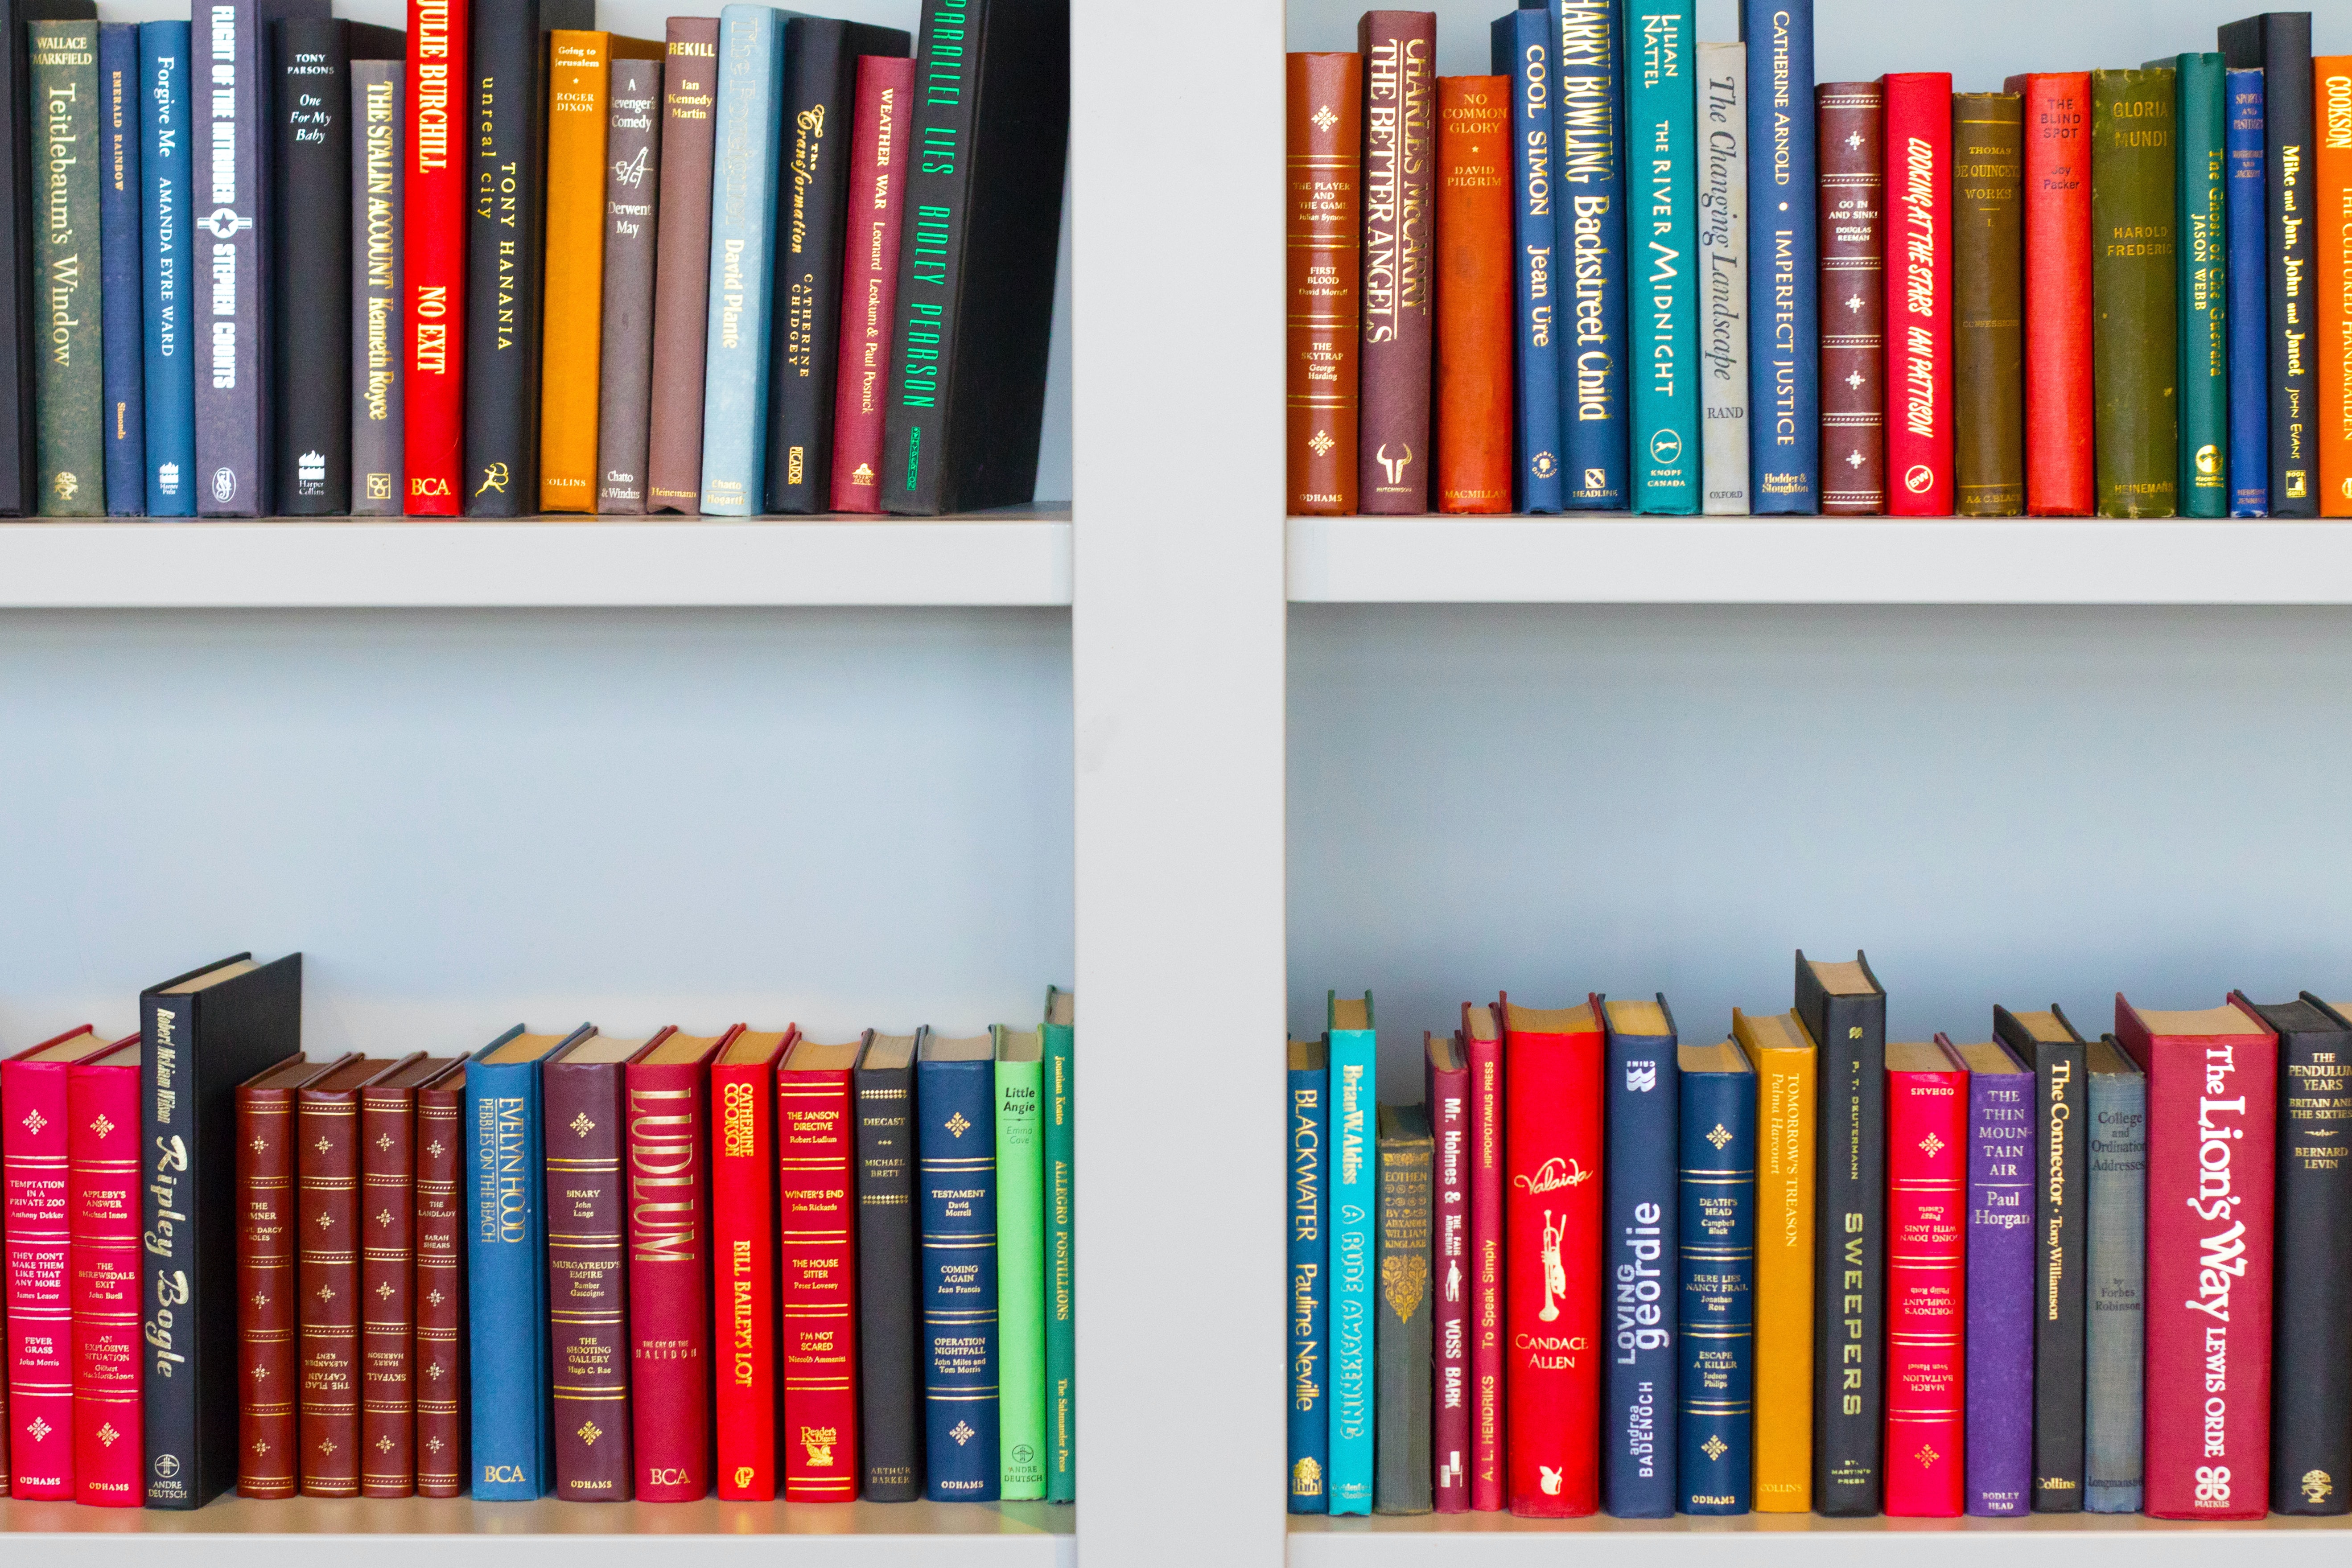 Bookshelves with colourful books. Photo by Nick Fewings on Unsplash